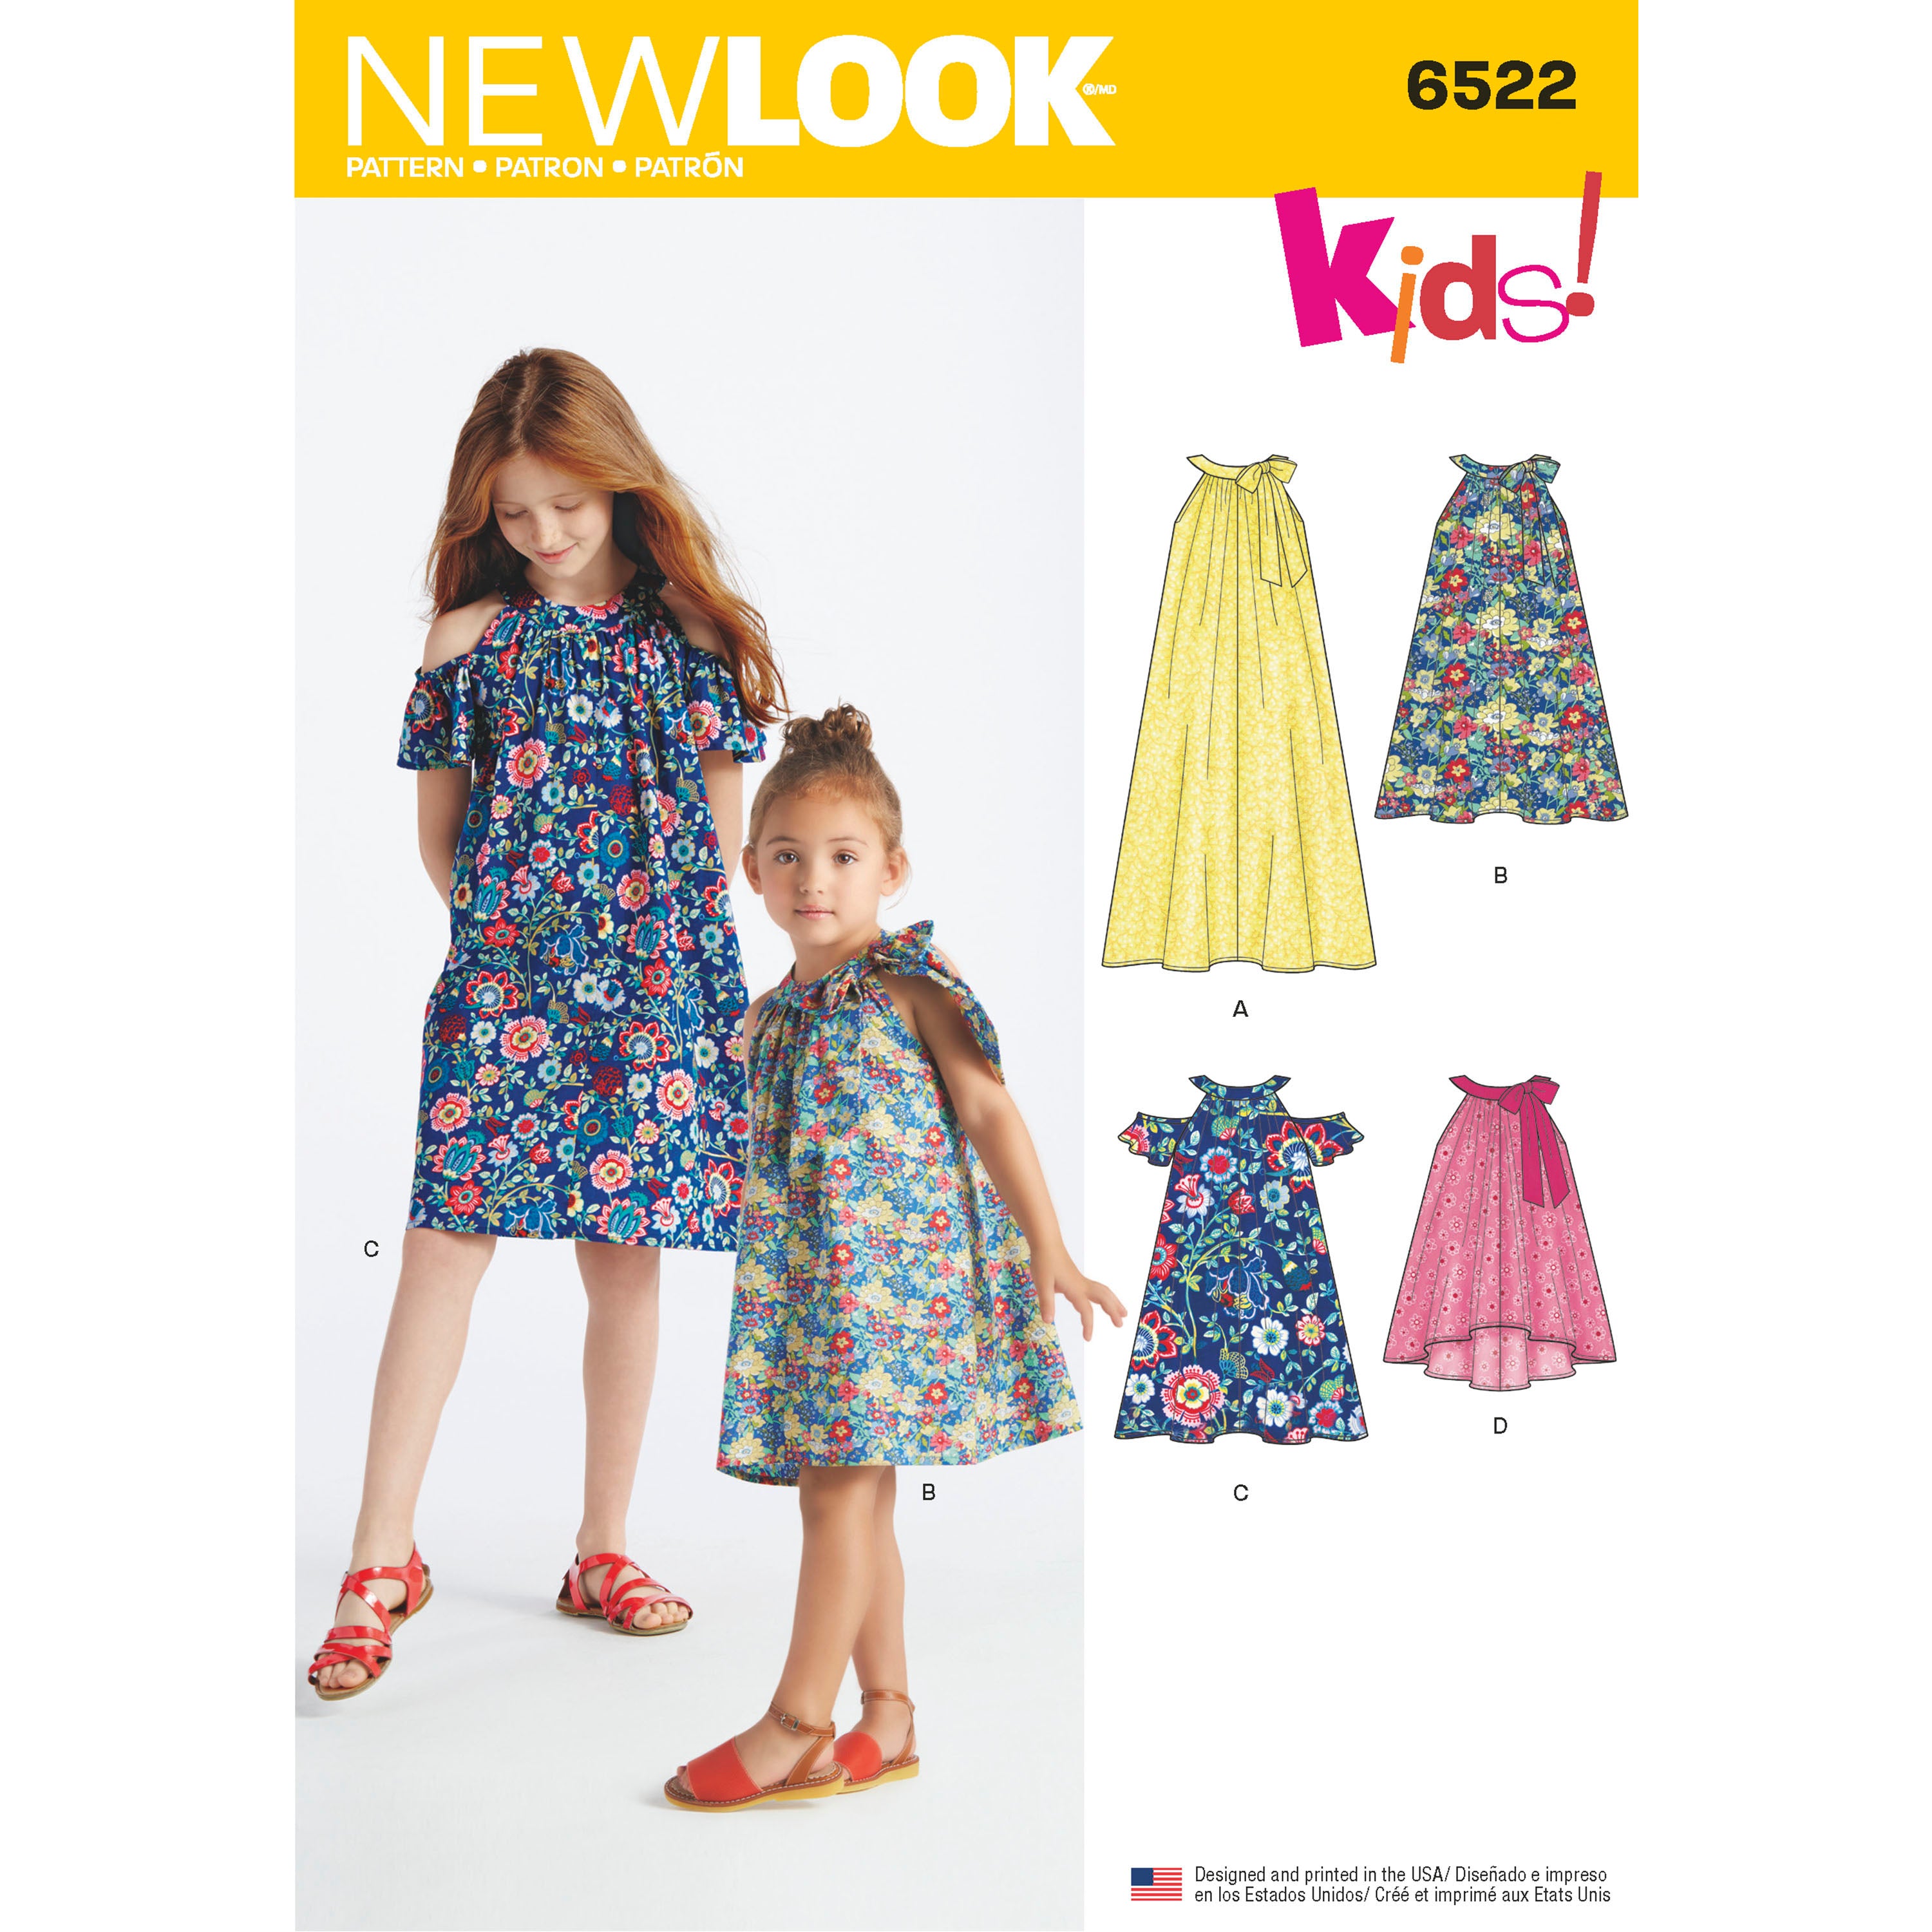 Sewing for GIRLS - Tips, Tricks & Best Girls Sewing Patterns | TREASURIE